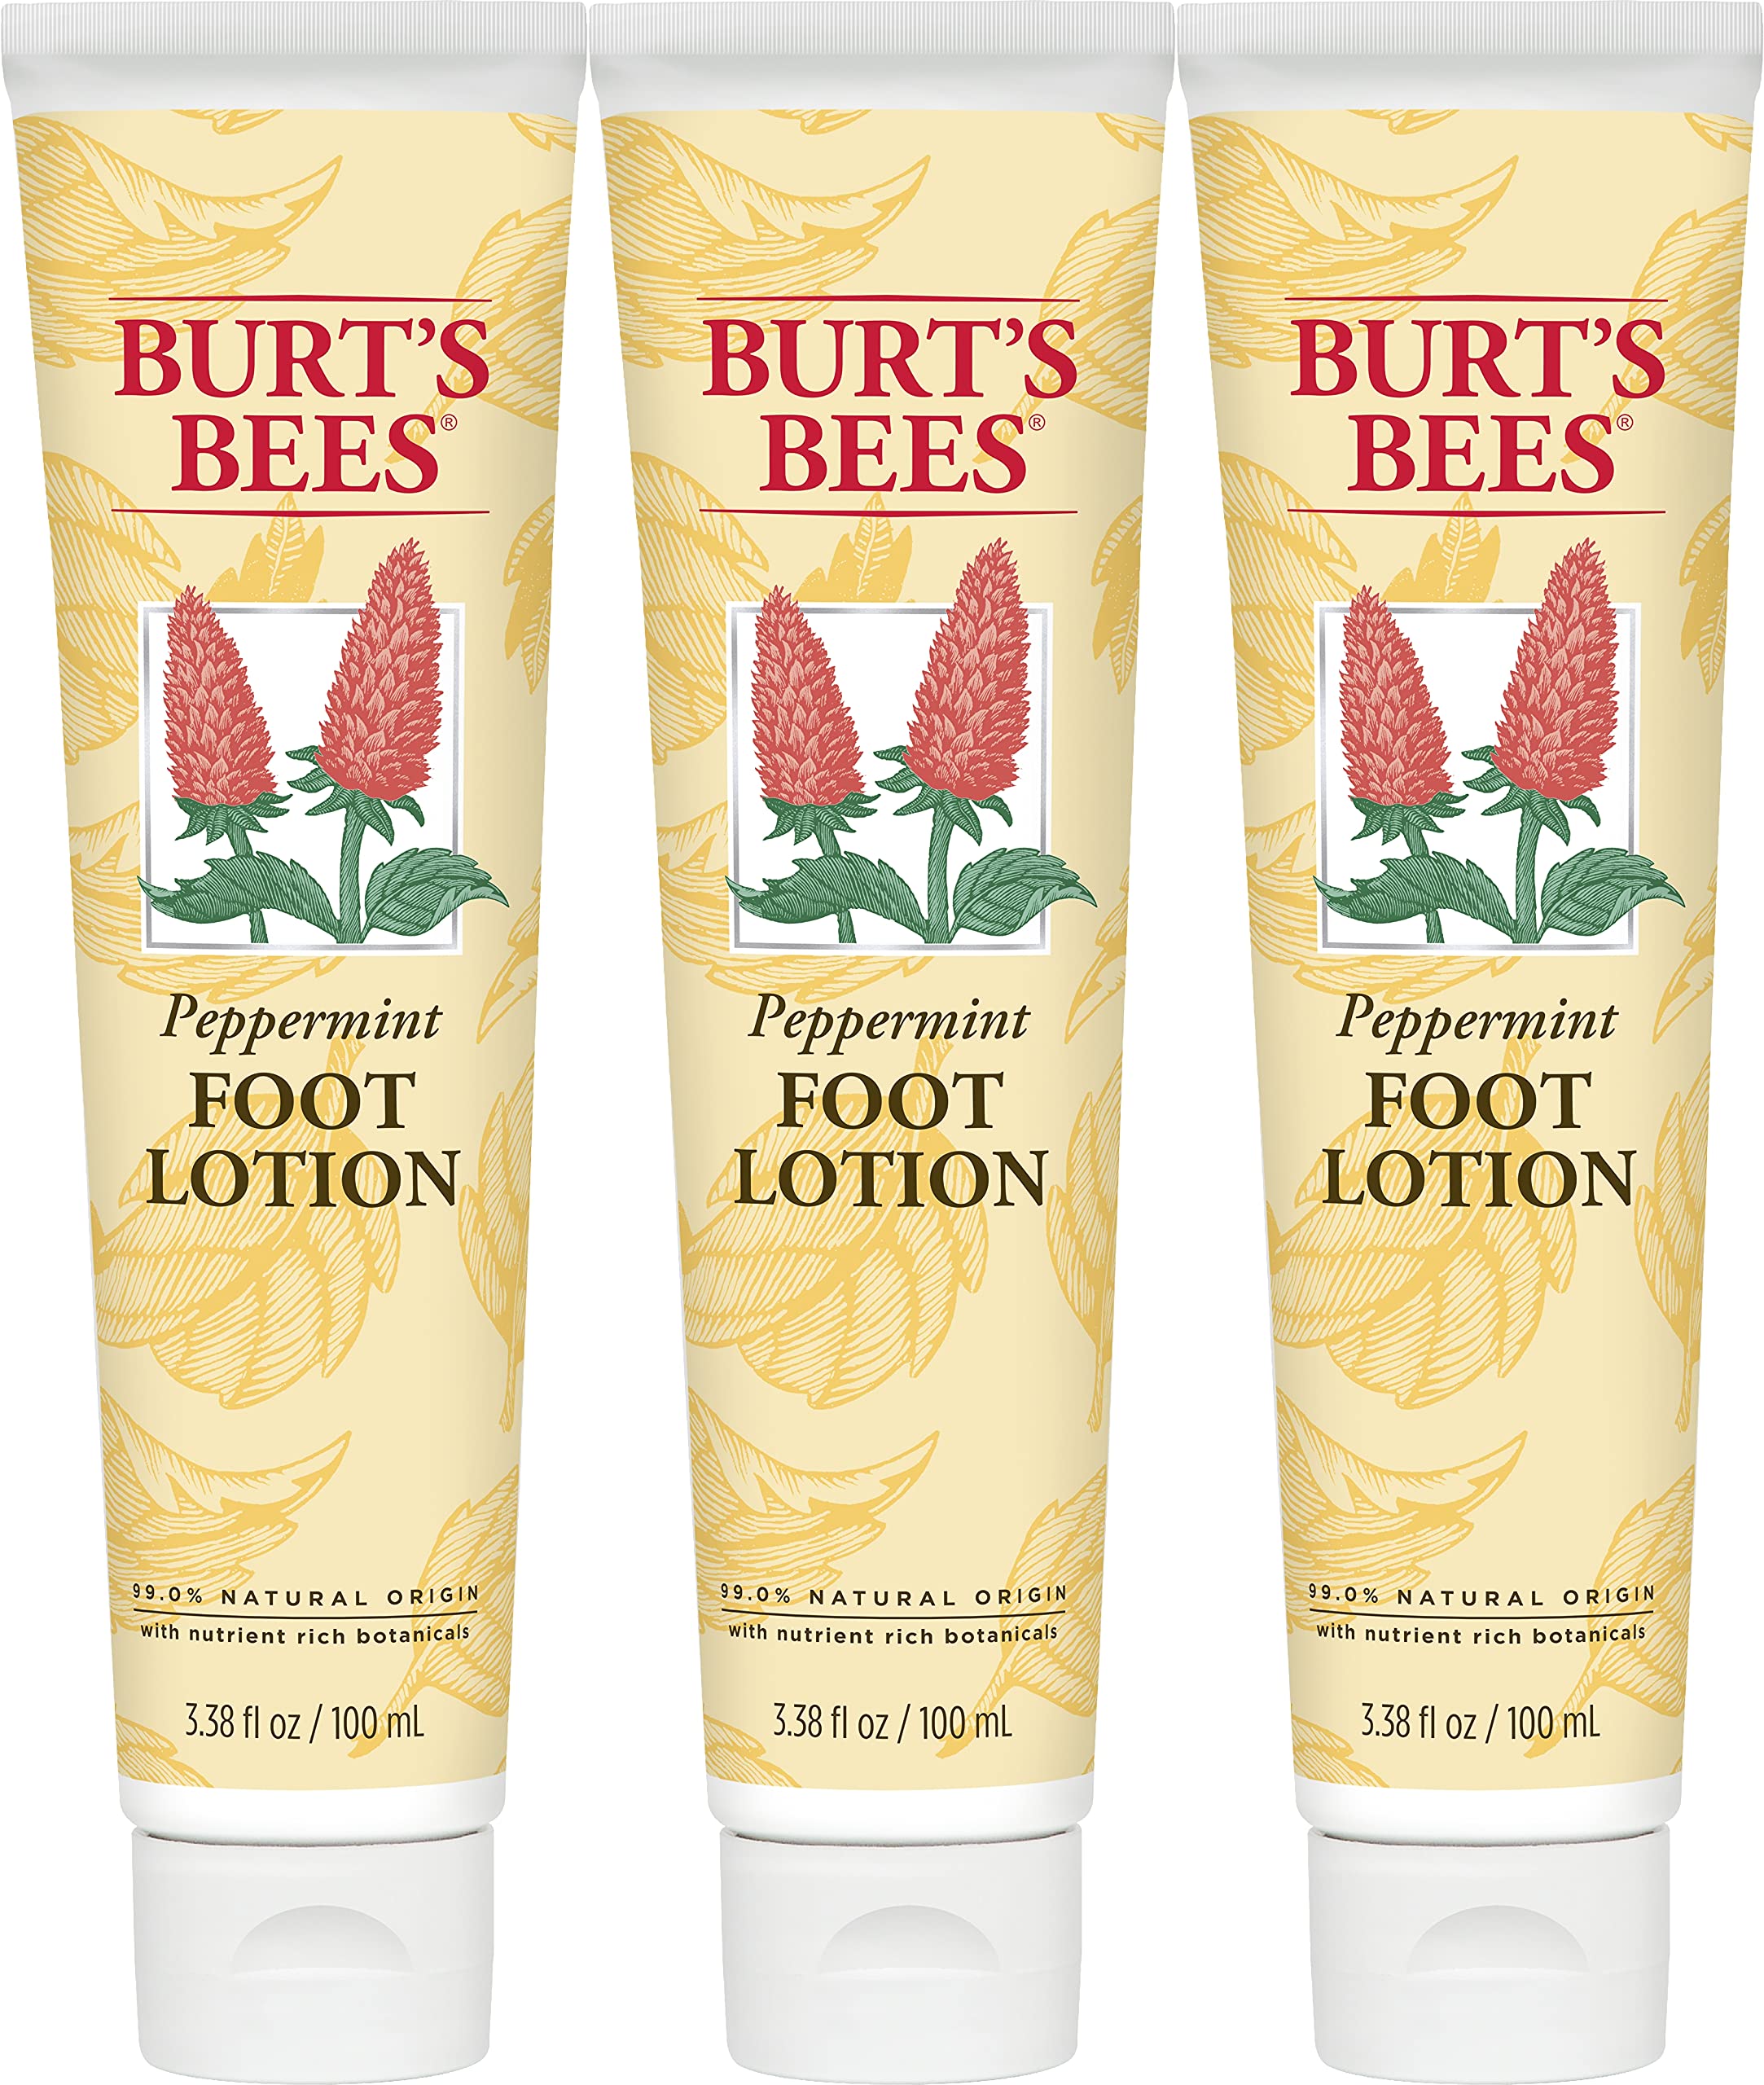 Burt's Bees Peppermint Oil Foot Lotion, 3.38 Oz - Pack of 3 (Package May Vary)